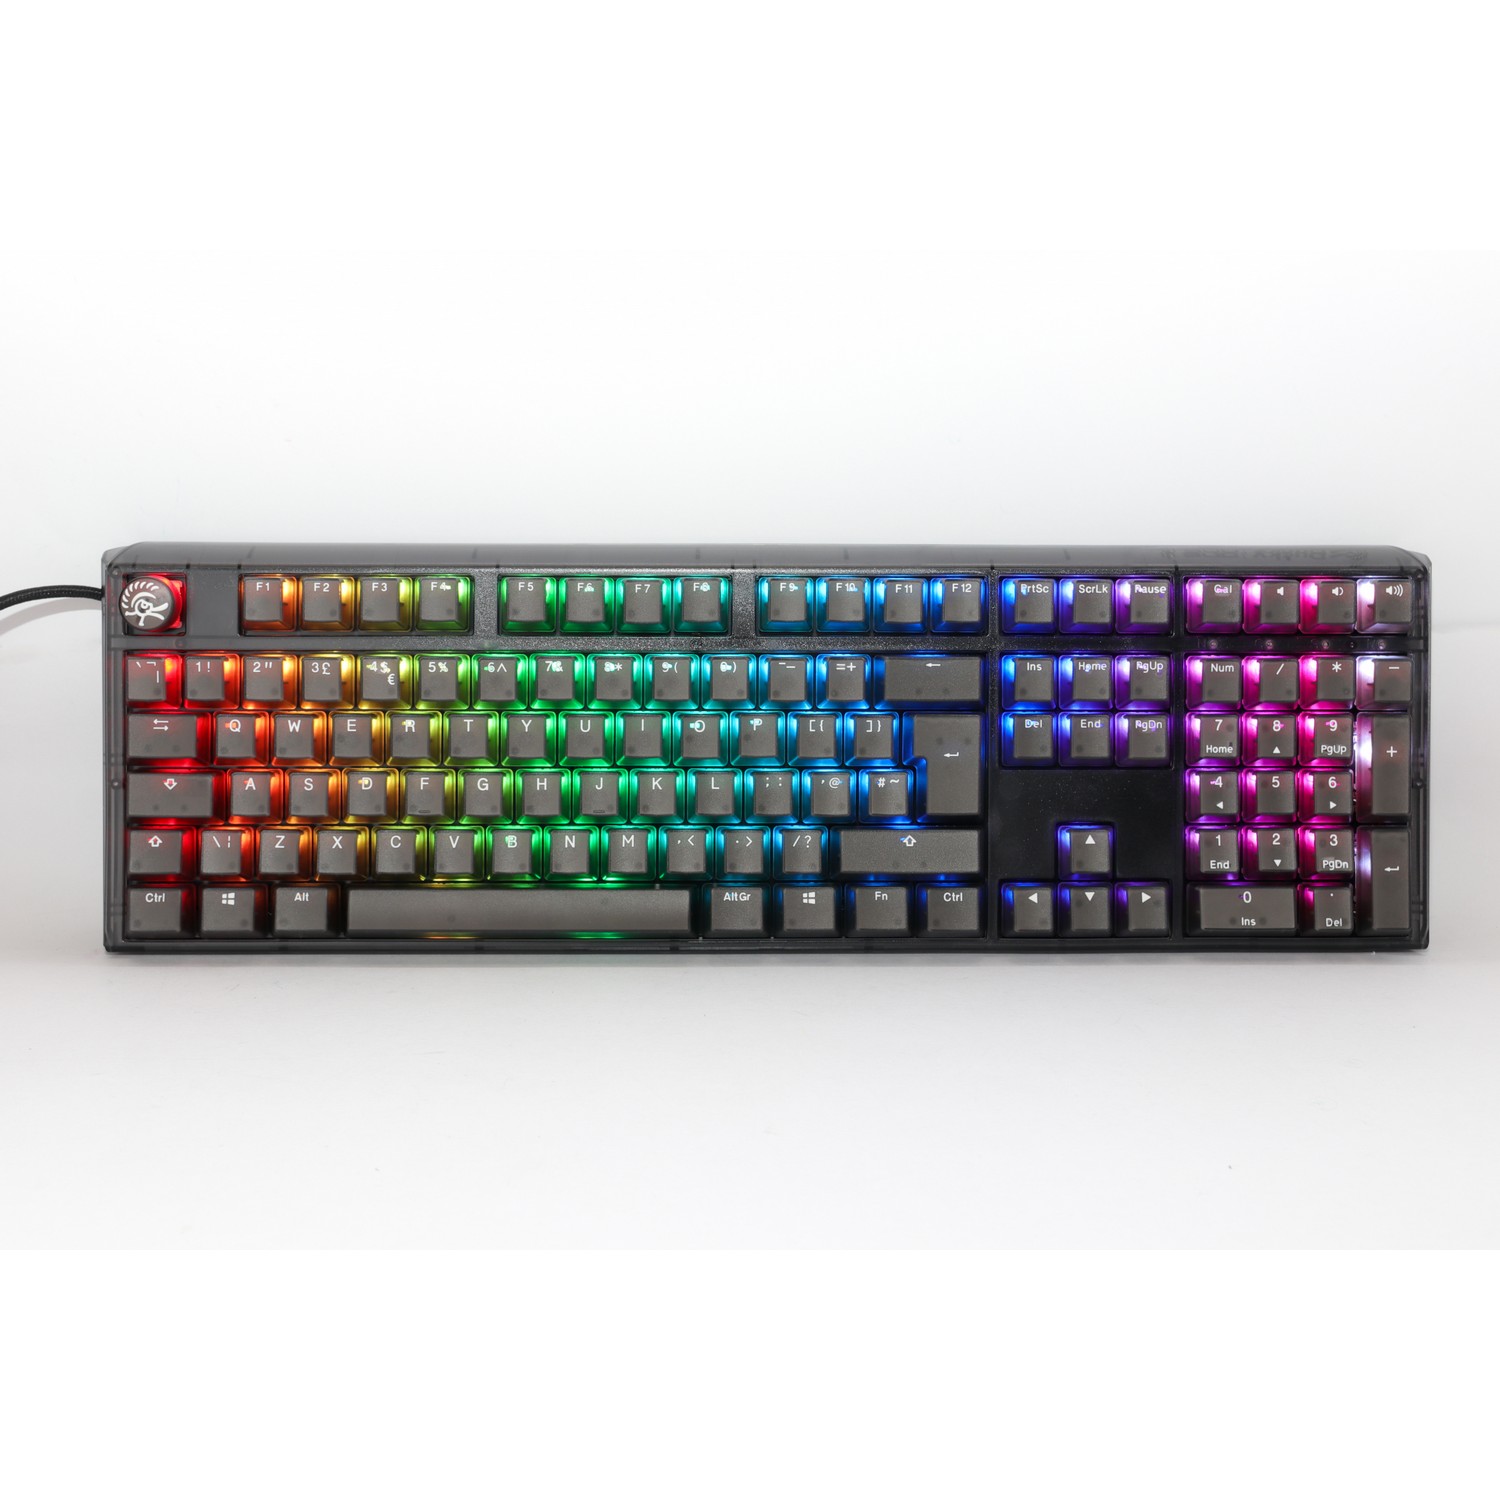 Ducky - Ducky One 3 Aura Mechanical Gaming Keyboard Black Cherry Silent Red Switch UK Layout